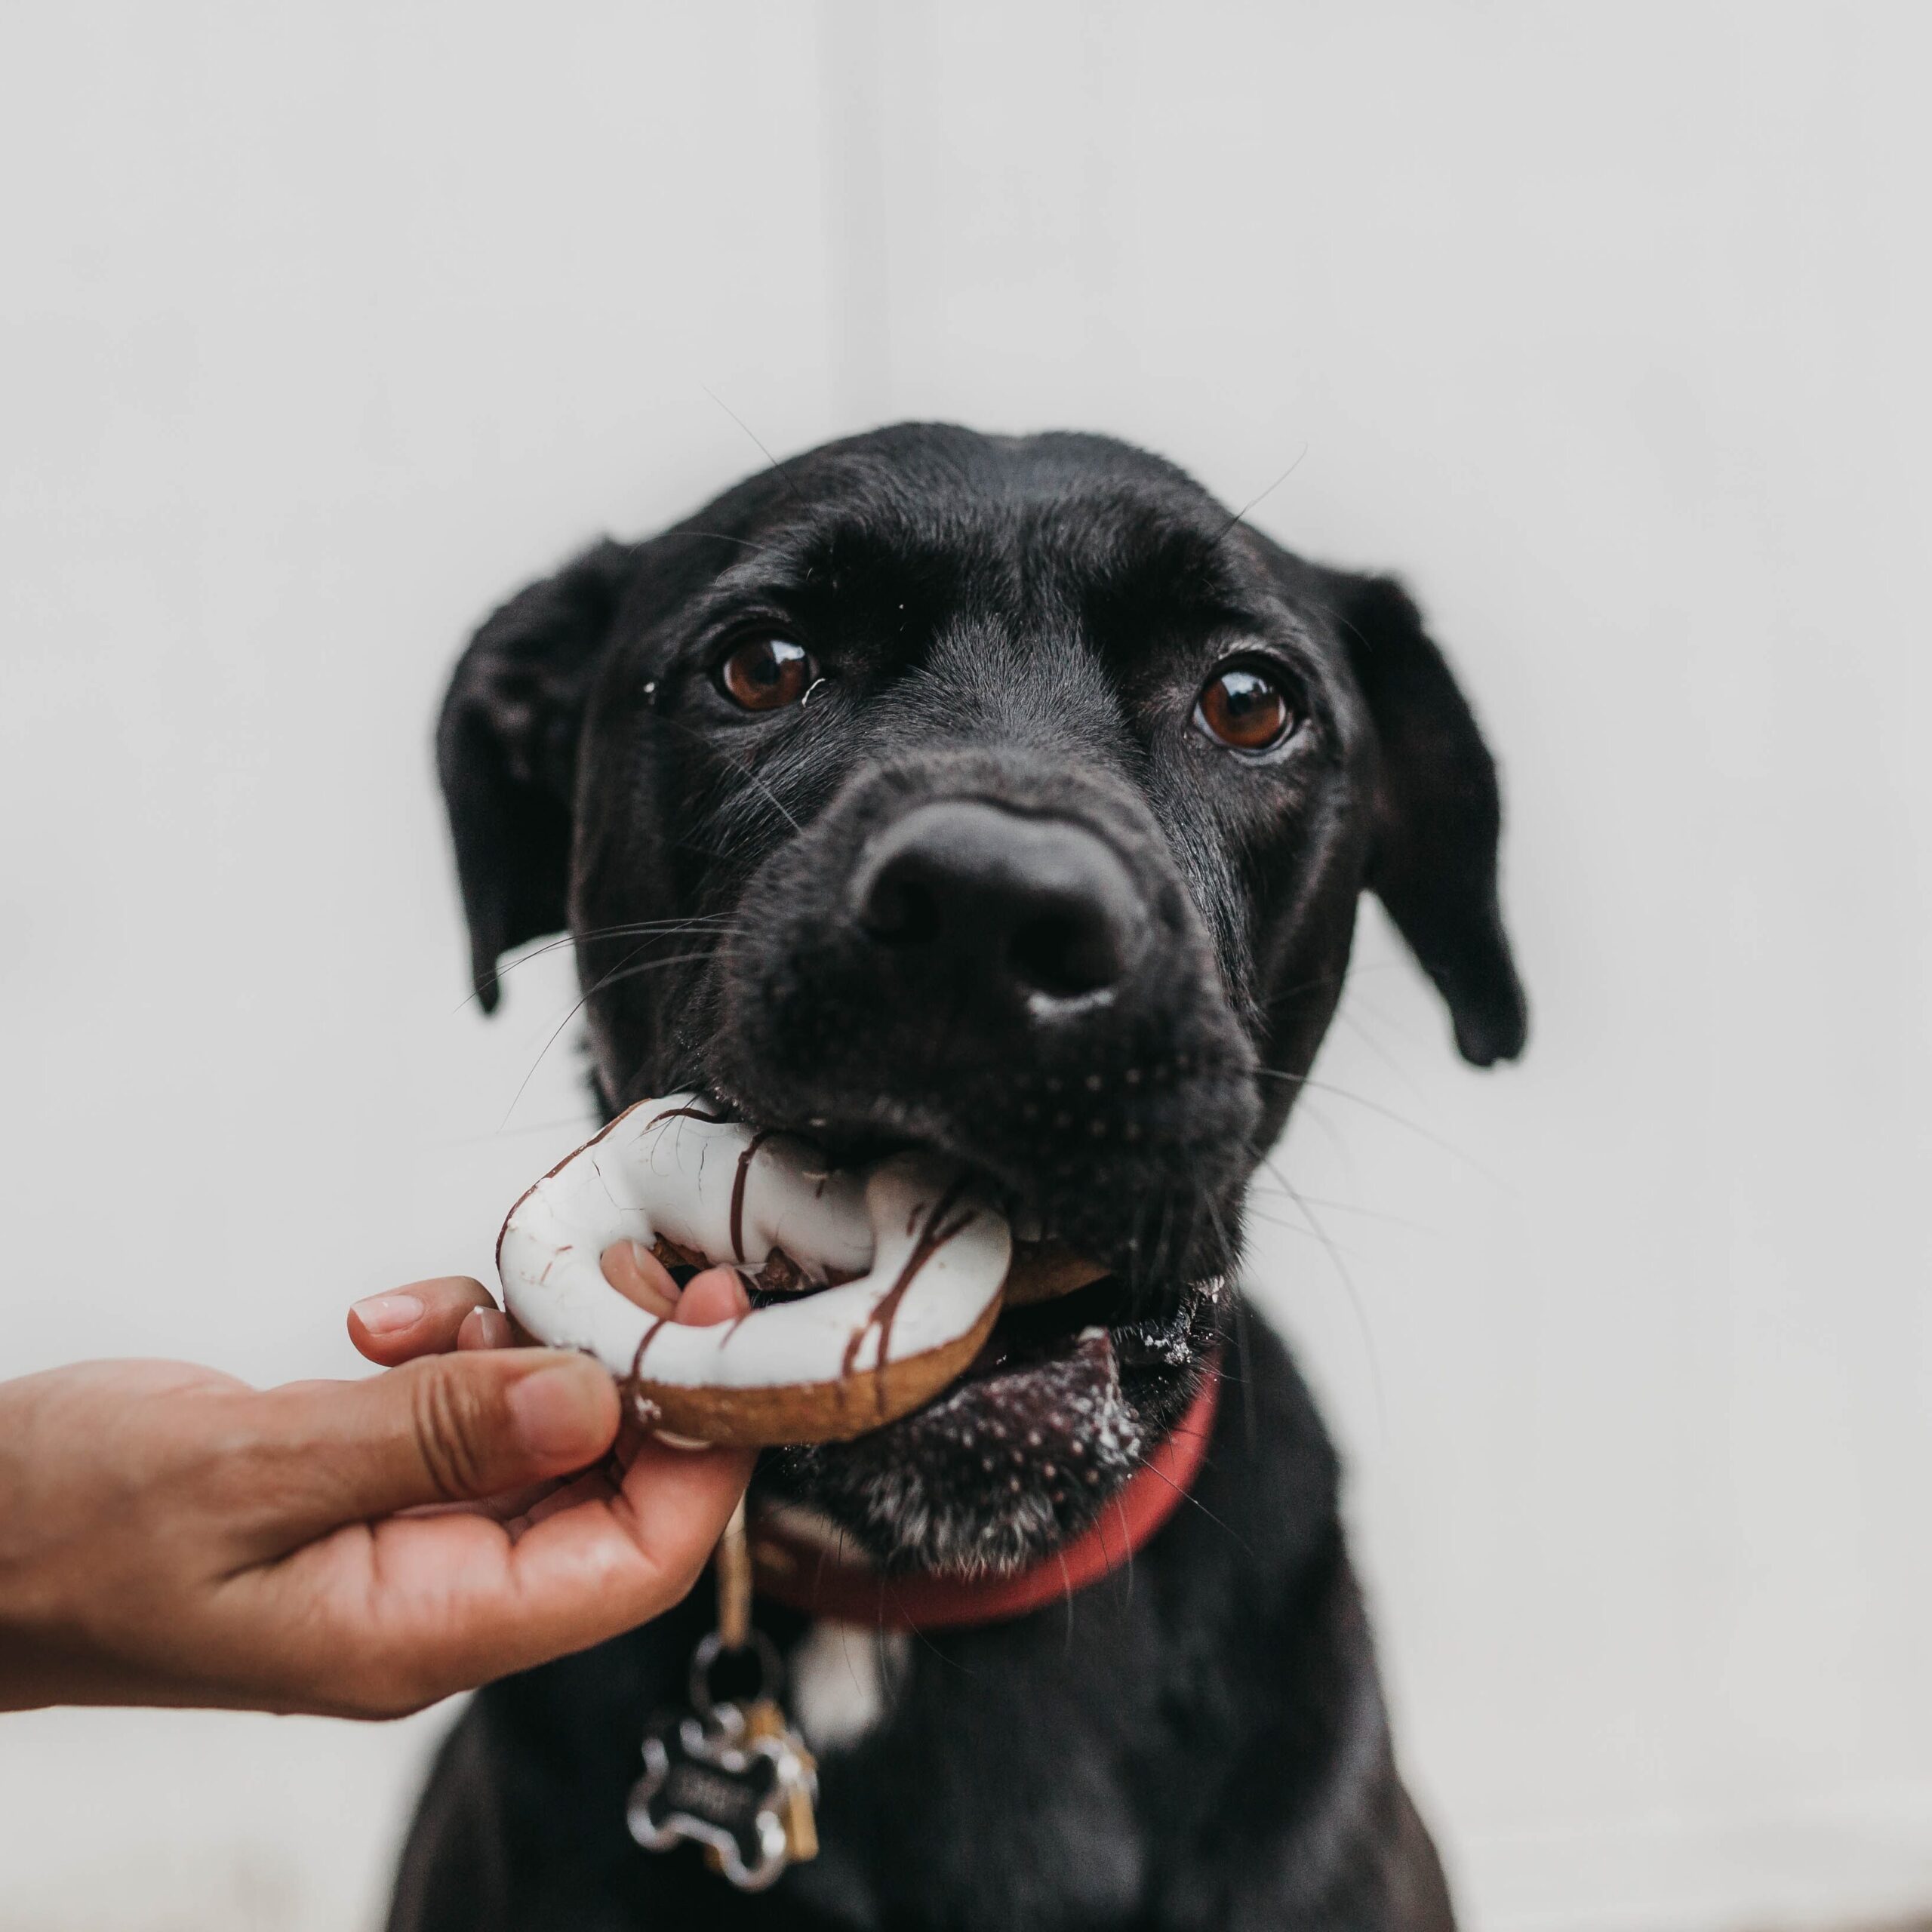 a black puppy is taking a bite of a donut that is being handed to him from someone out of shot